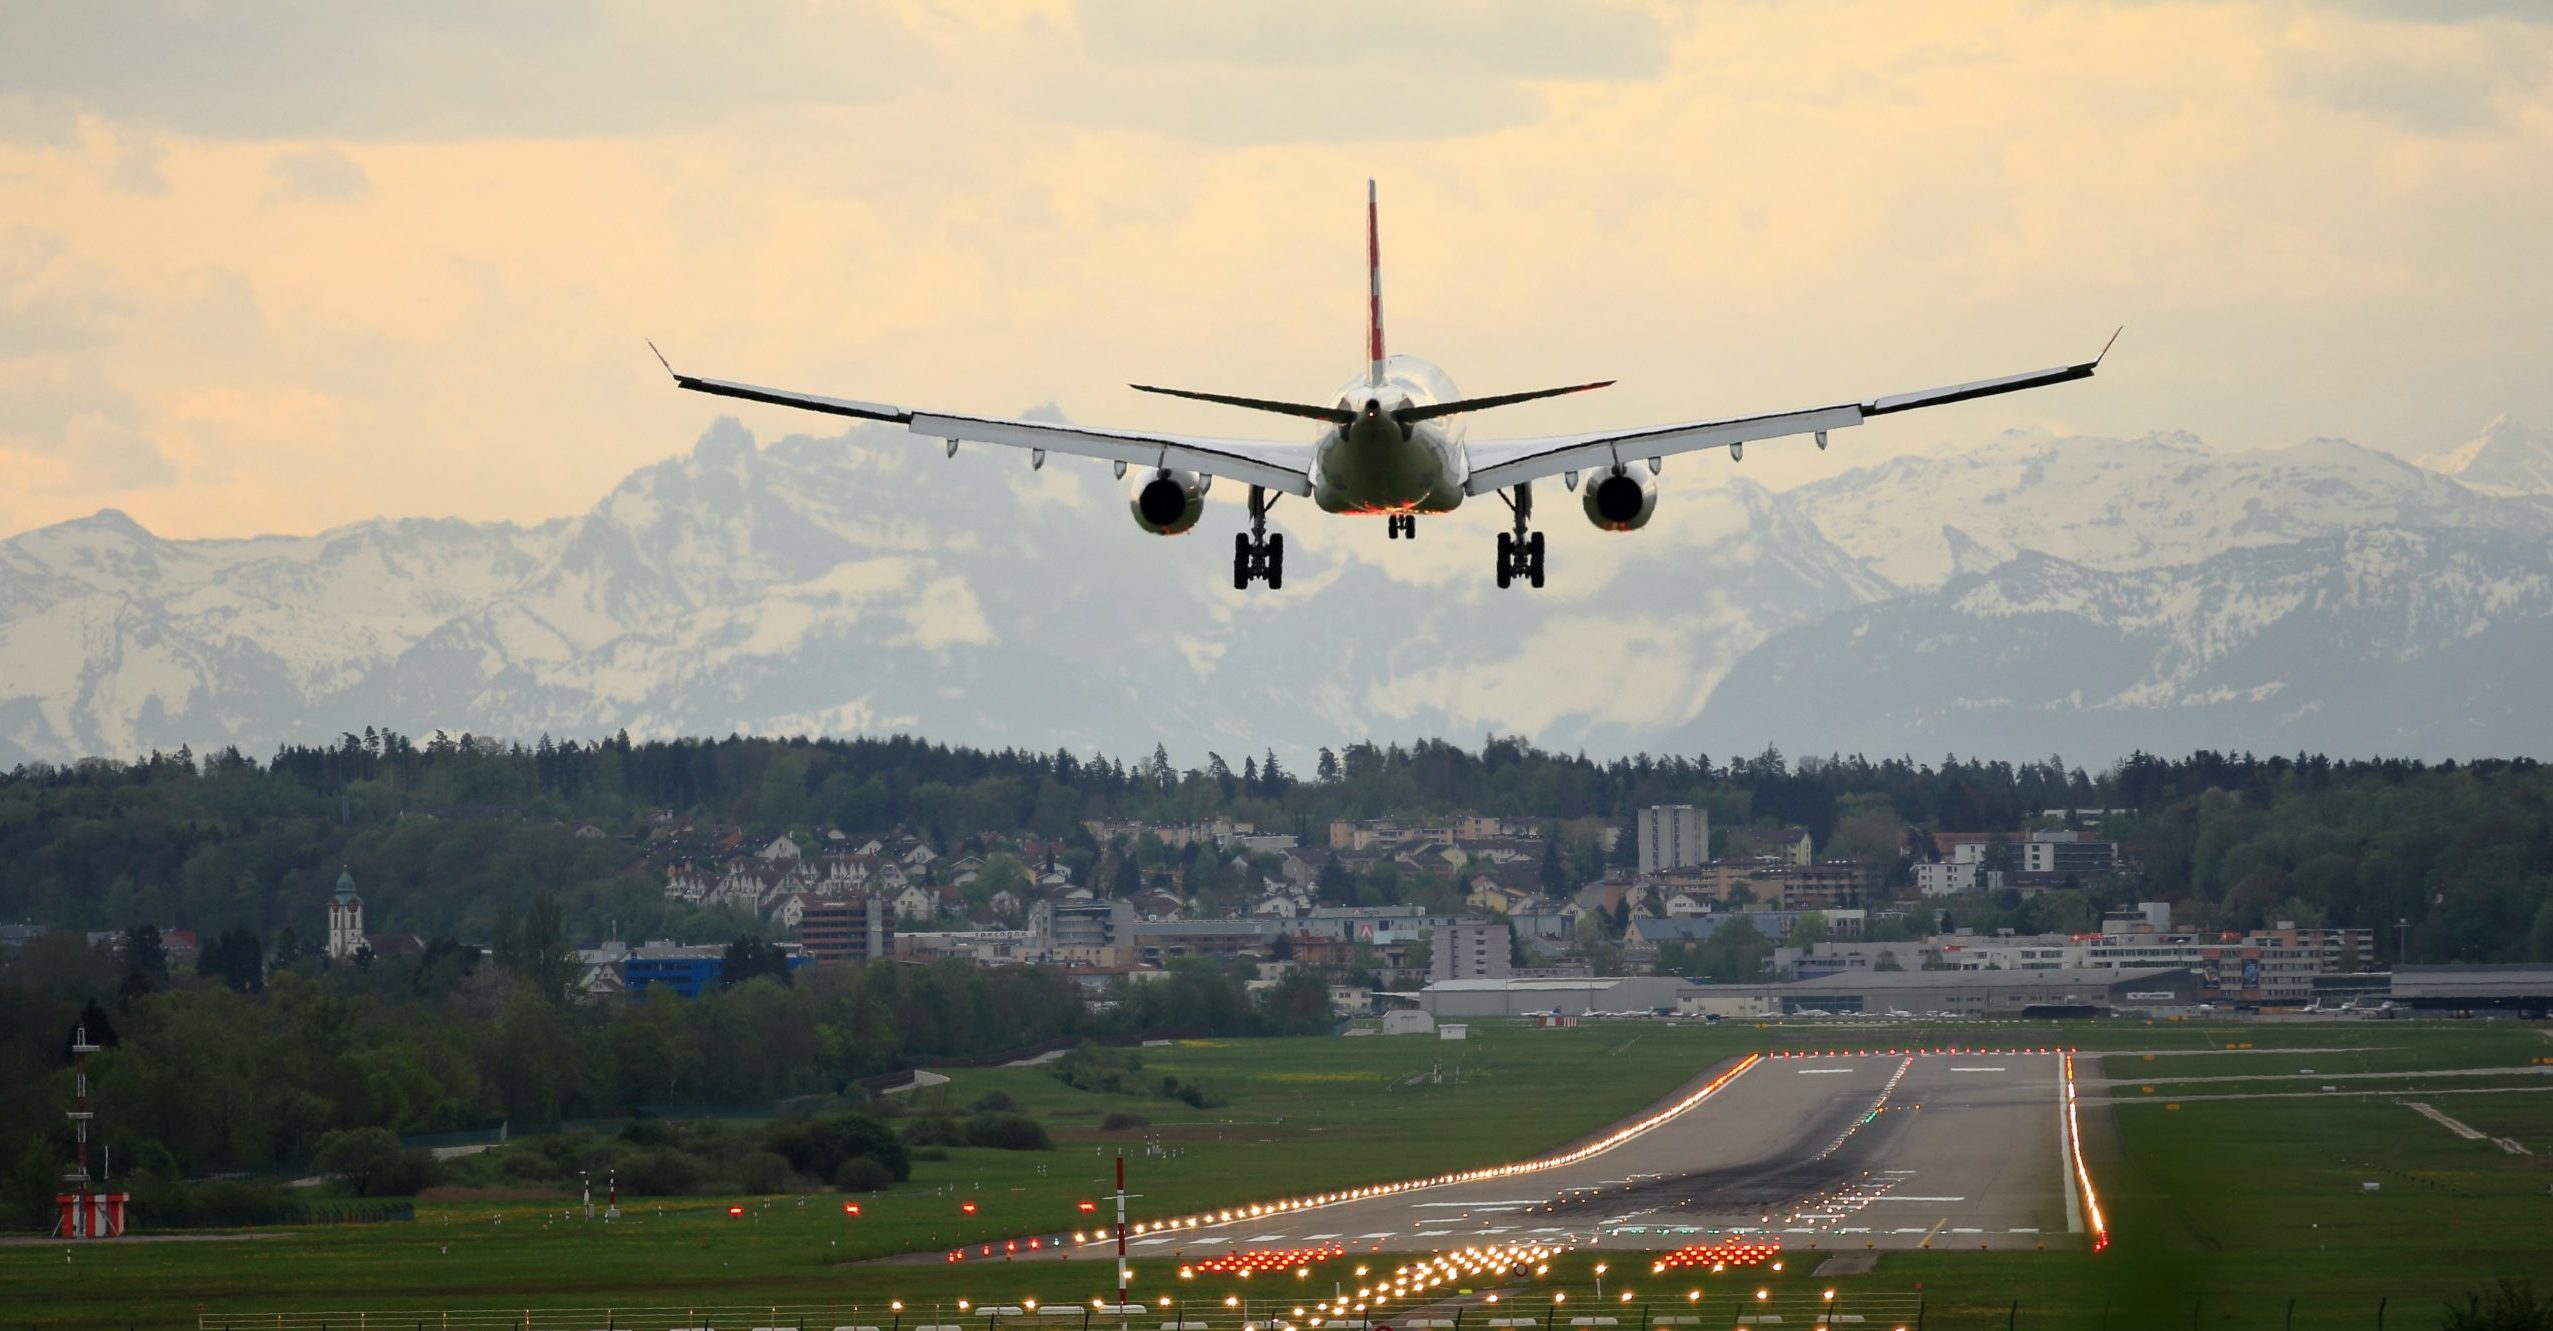 An airplane lands. A mountain view is in the distance.